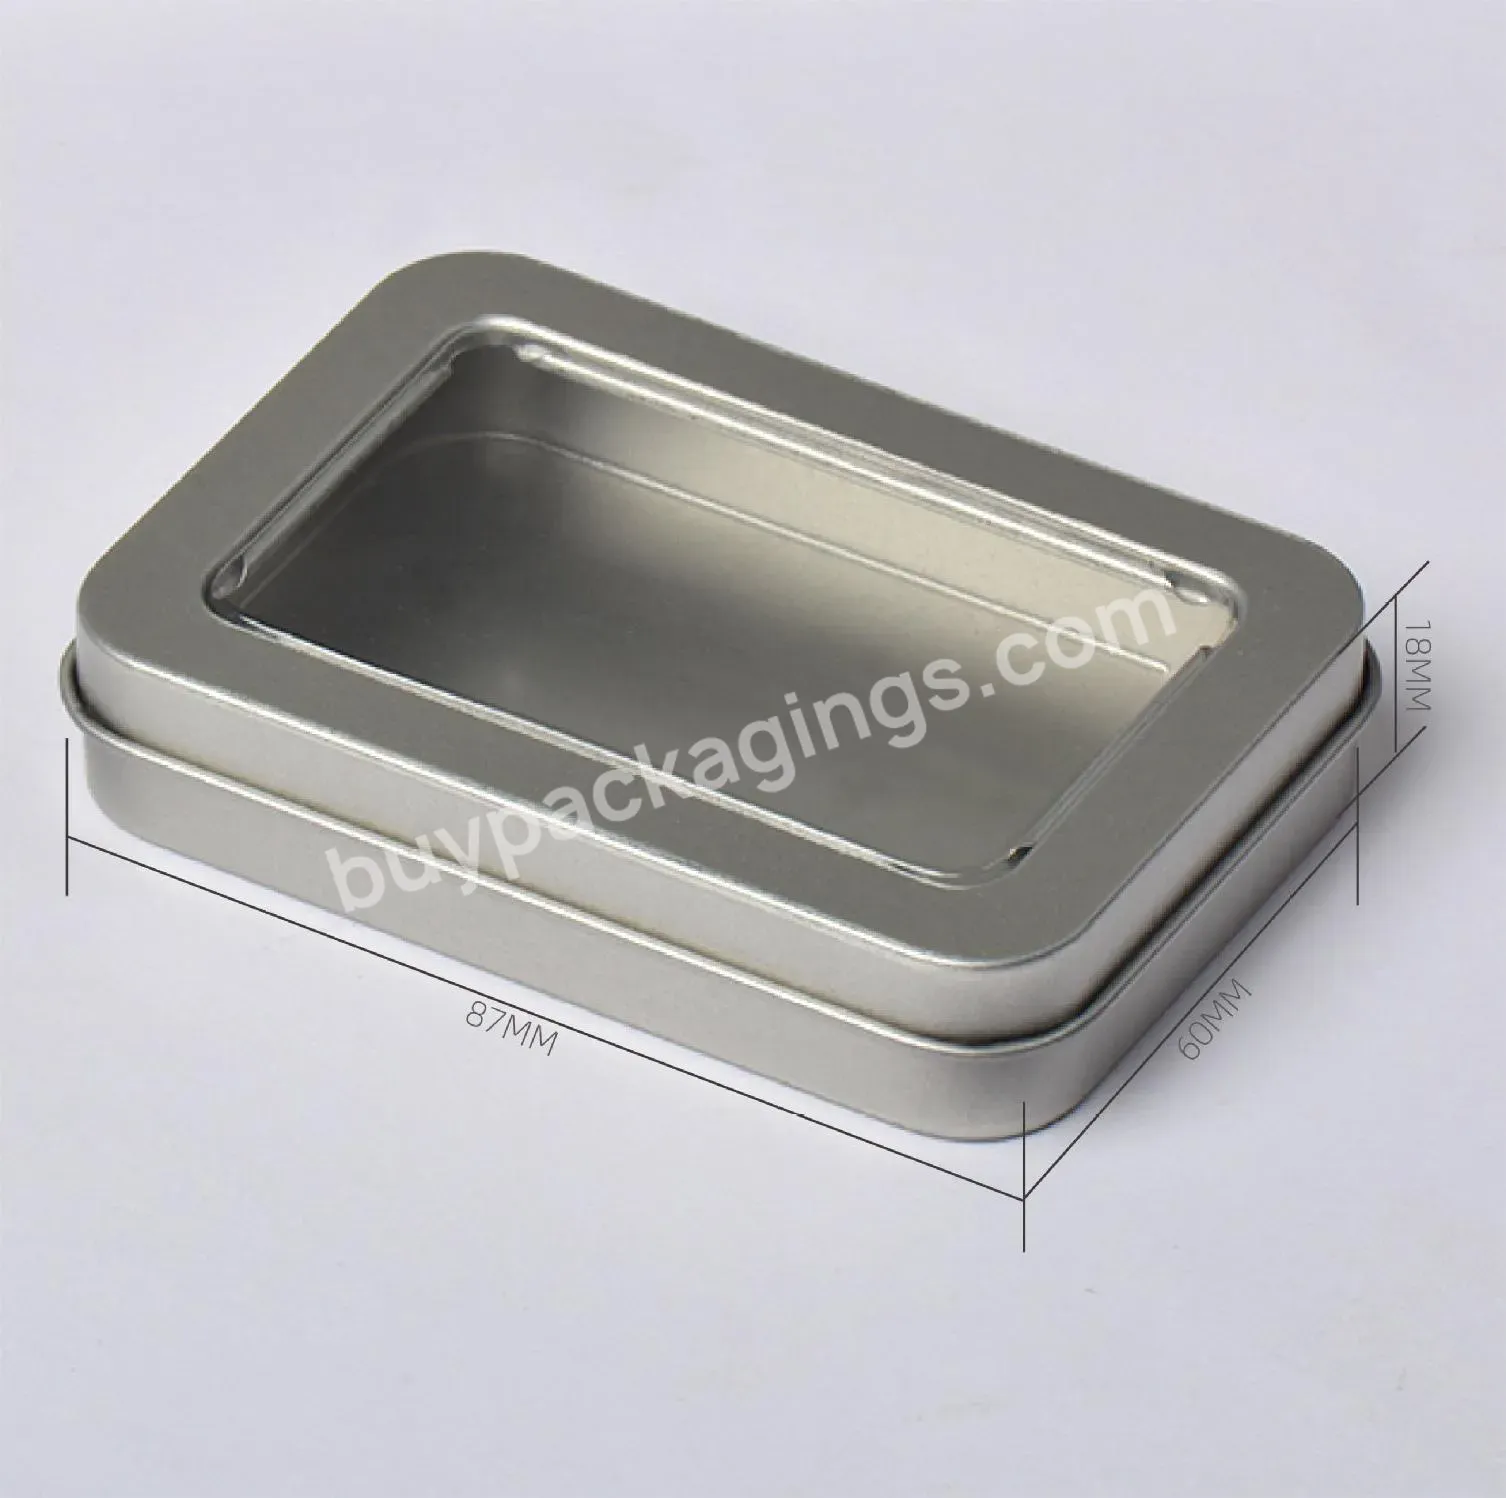 Wholesale Customized Rectangular Gold Tins With Pvc Clear Window Lids Metal Empty Tin Box For Cookies Biscuit Candy Packaging - Buy Christmas New Year Holiday Gift Tins Cans For Storage Food Graded Silver Gold Window With Two Lid Tinplate Boxes,Oem H